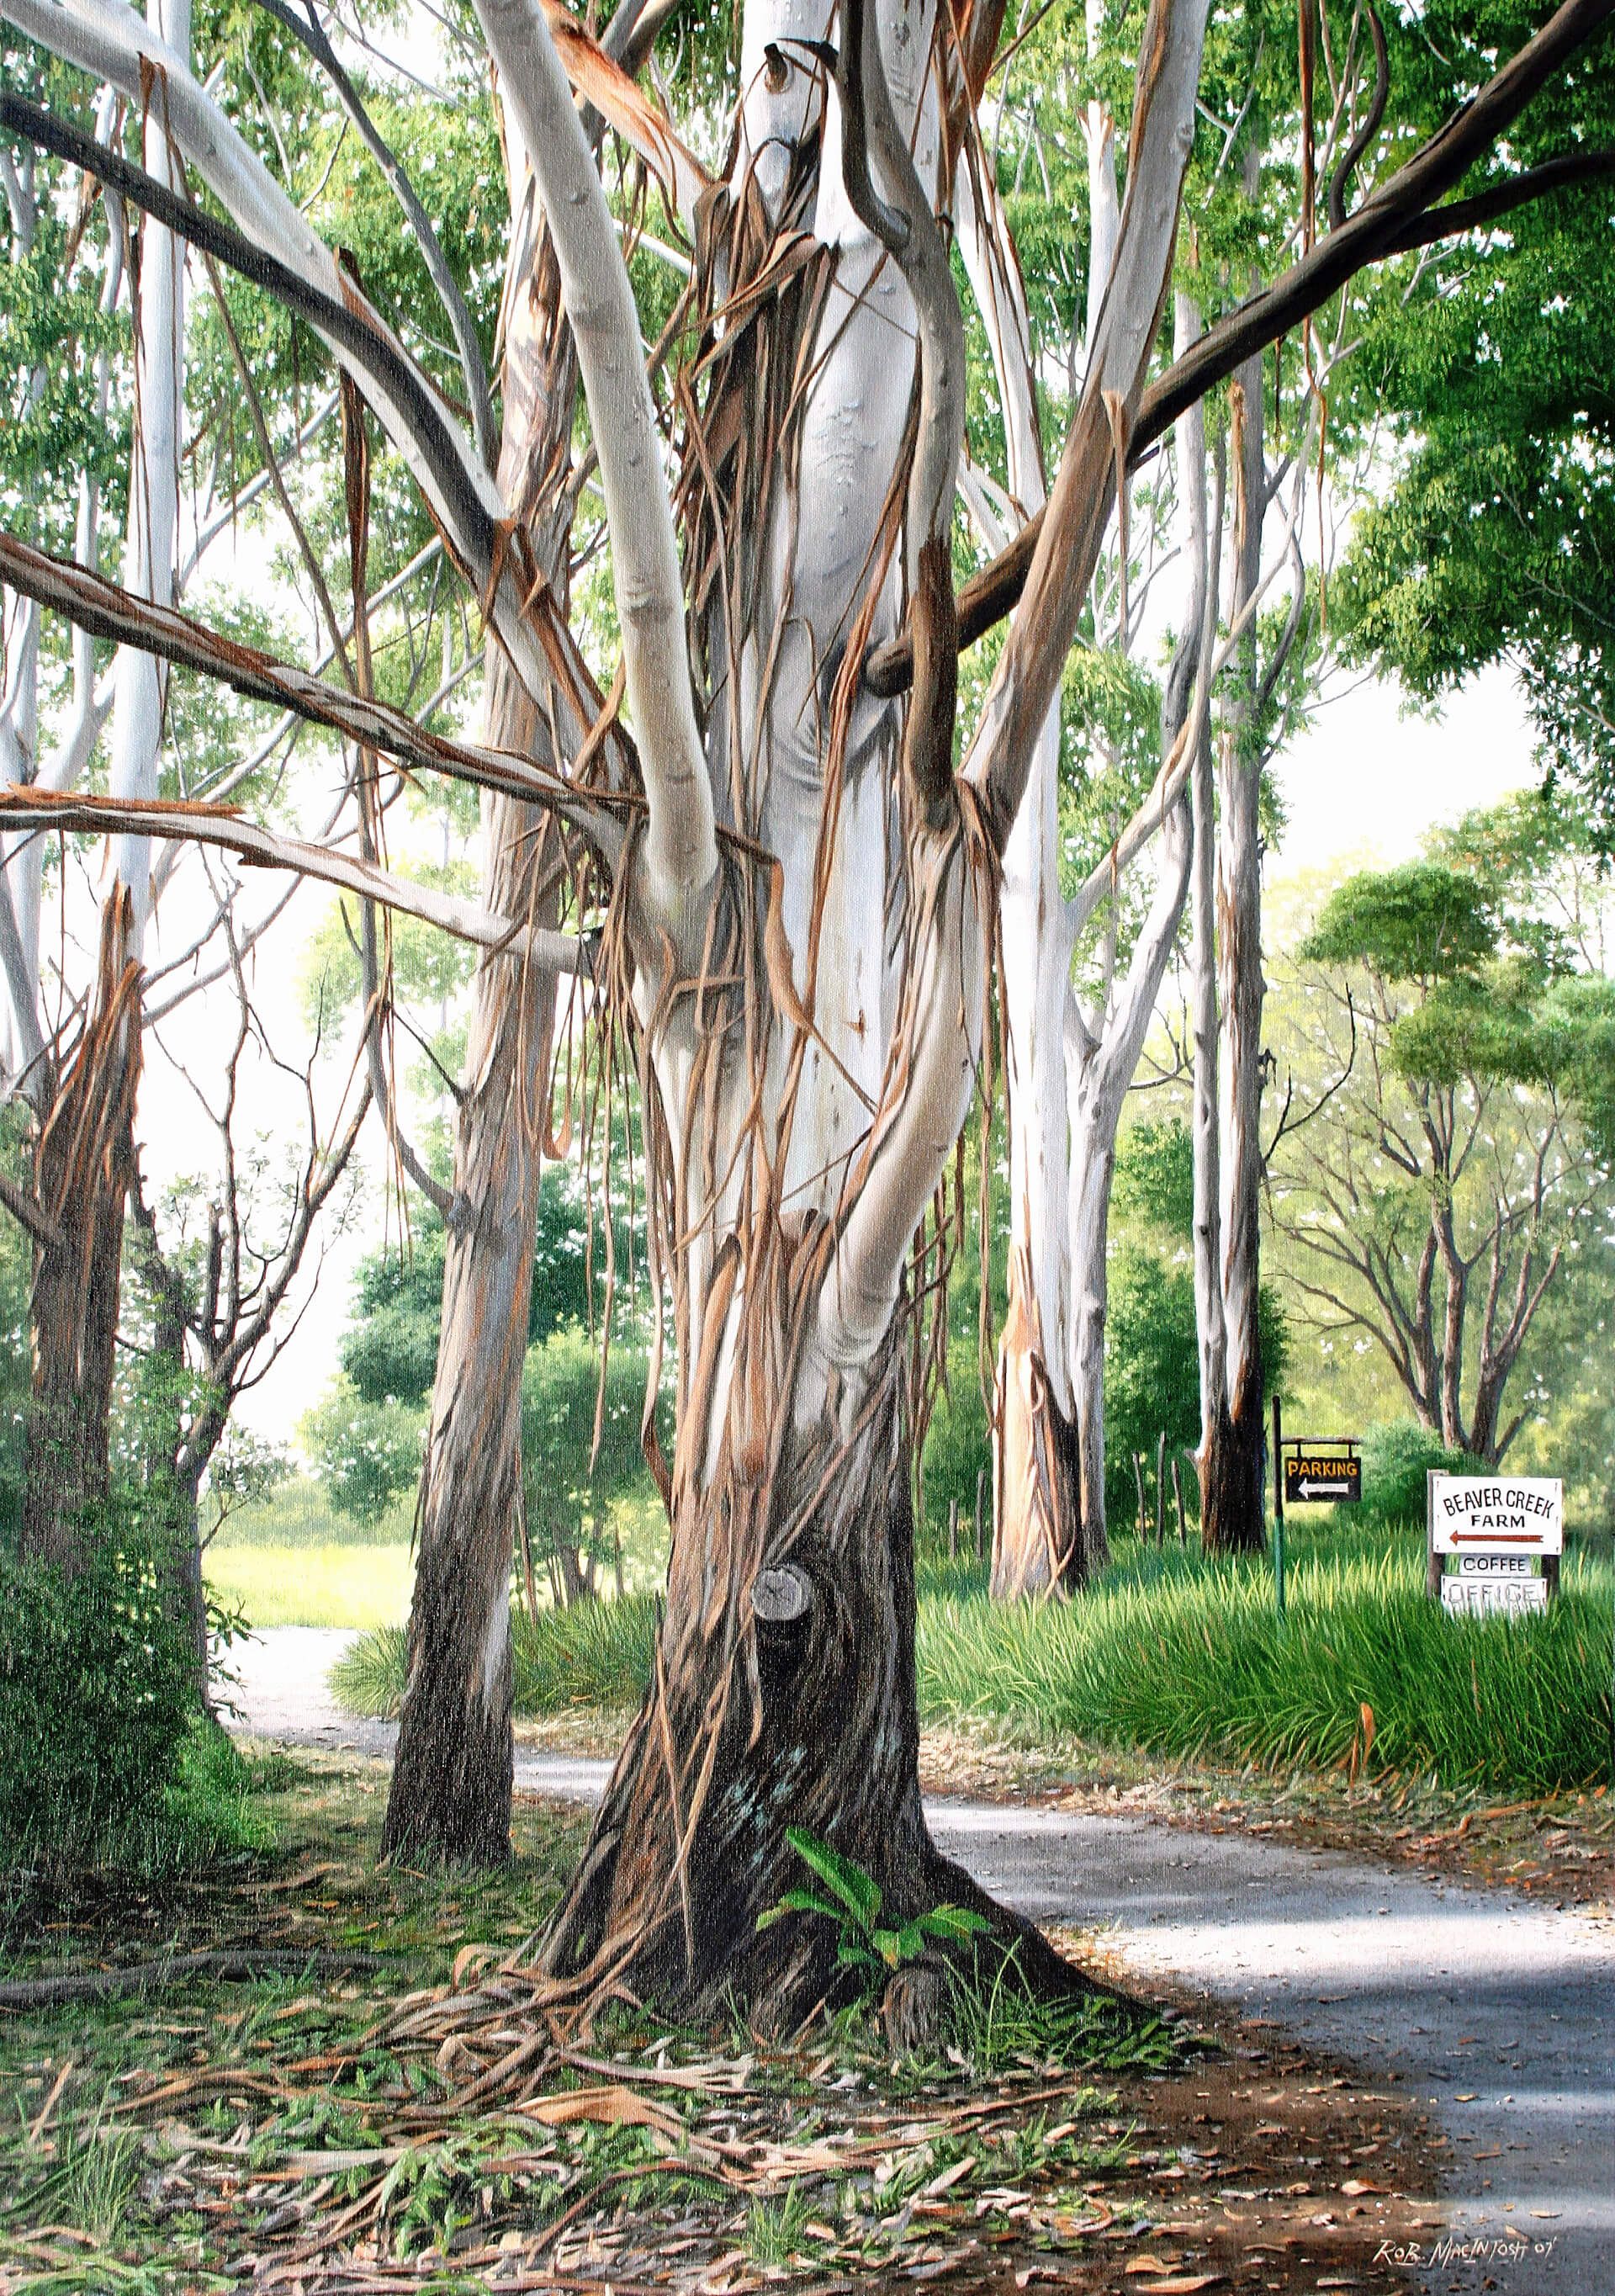 Photorealistic painting of a bluegum tree